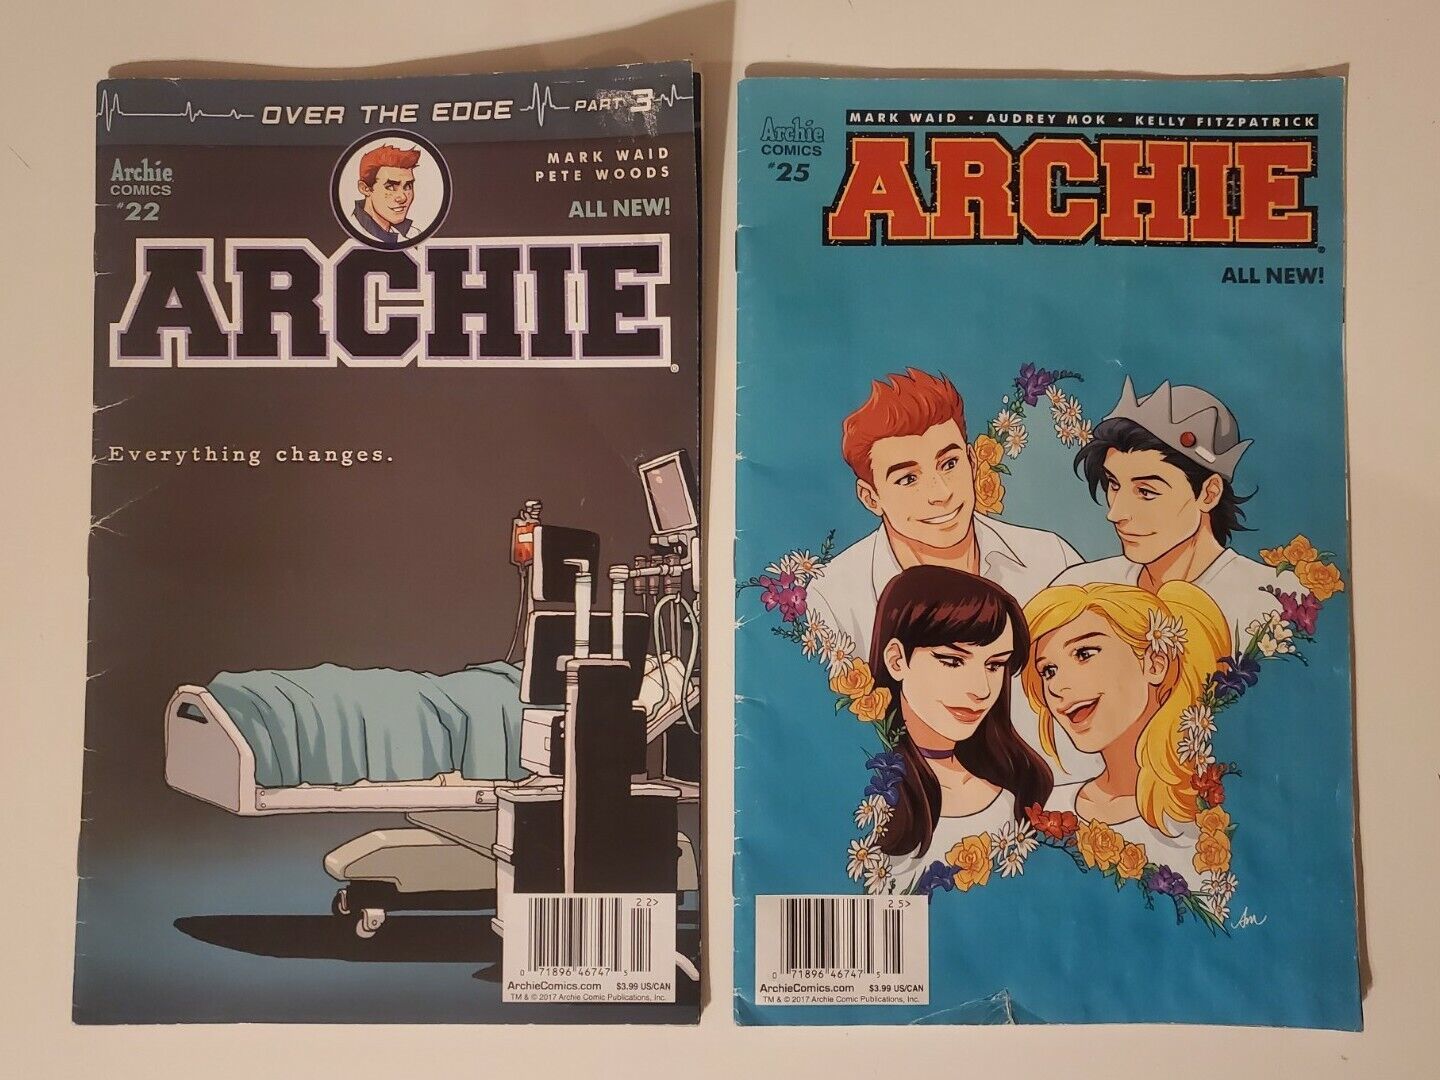 Primary image for Archie Comics, All New Archie #22, #25, Riverdale, Mark Waid